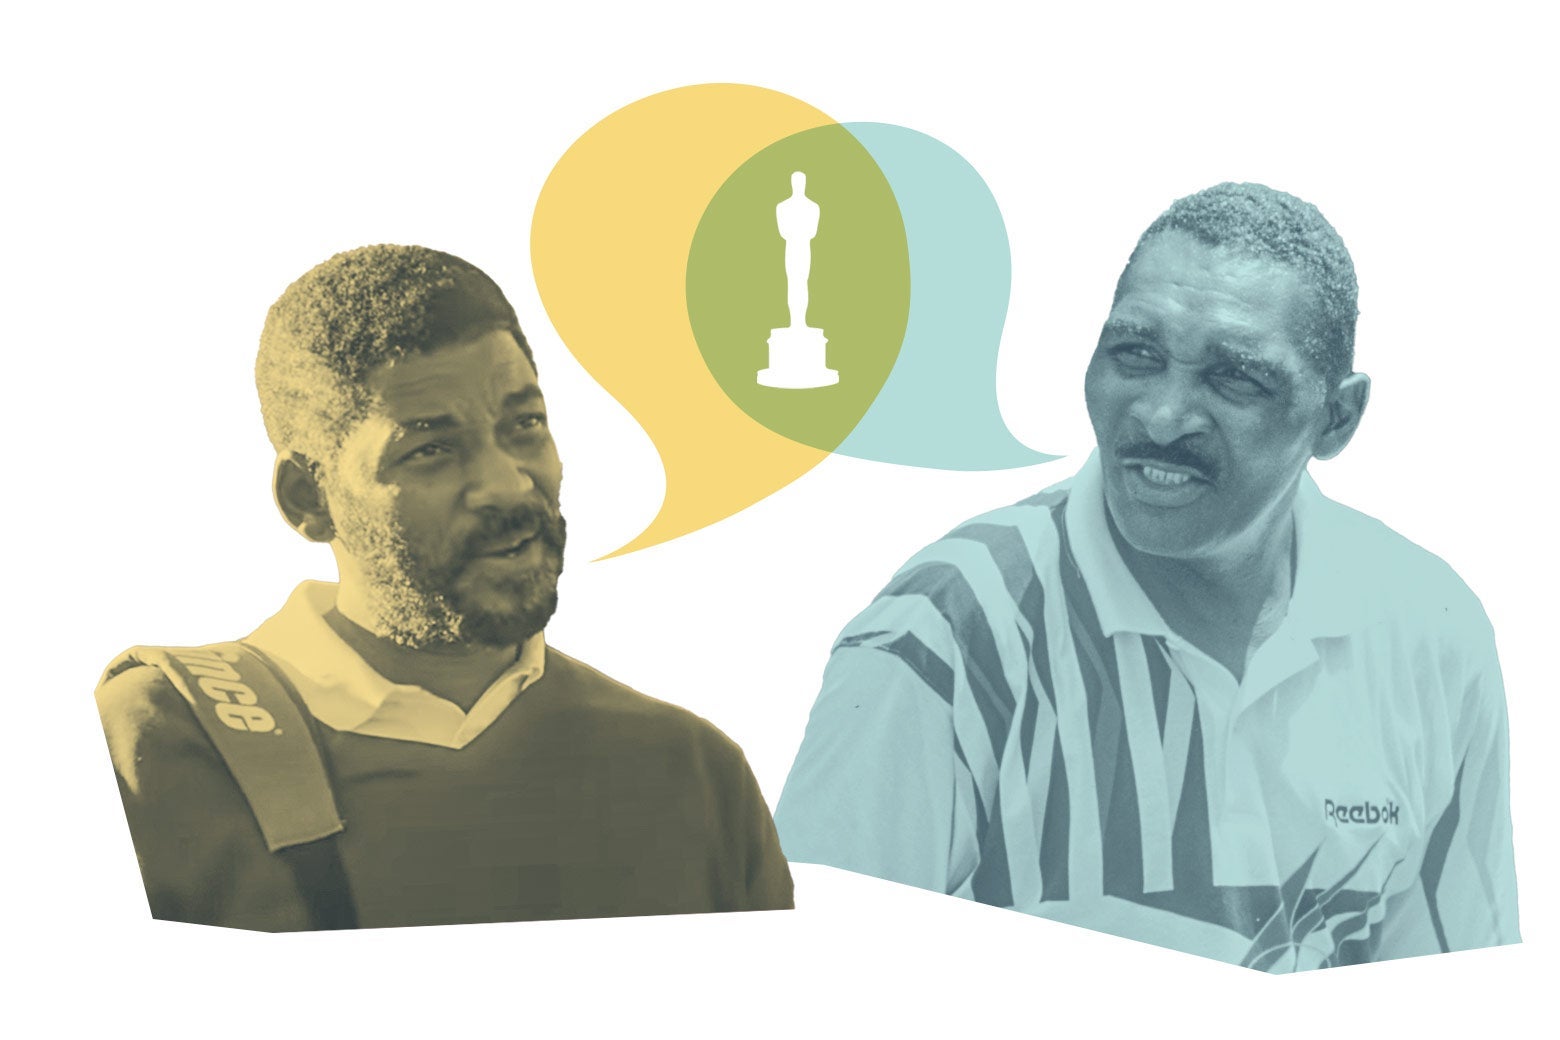 Collage of Will Smith as Richard Williams and the real Richard Williams with speech bubbles coming out of their mouths that overlap over an Oscar statuette